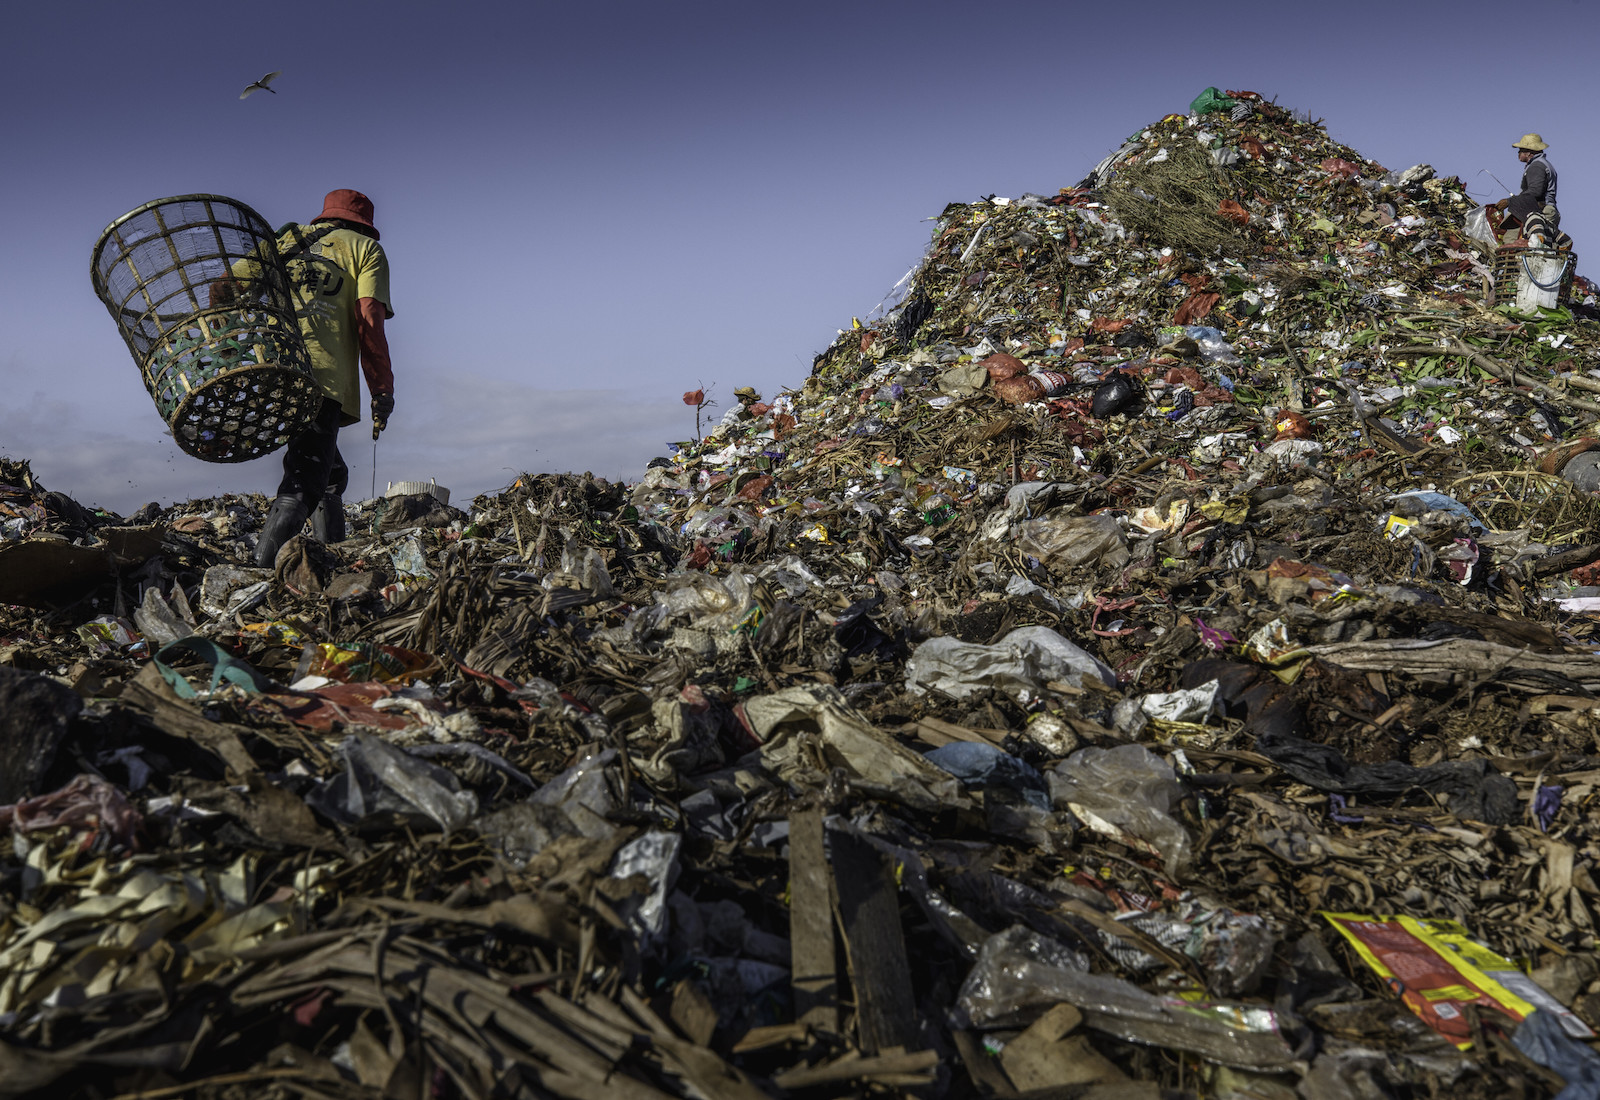 https://grist.org/wp-content/uploads/2022/03/bali-landfill.jpg?quality=75&strip=all